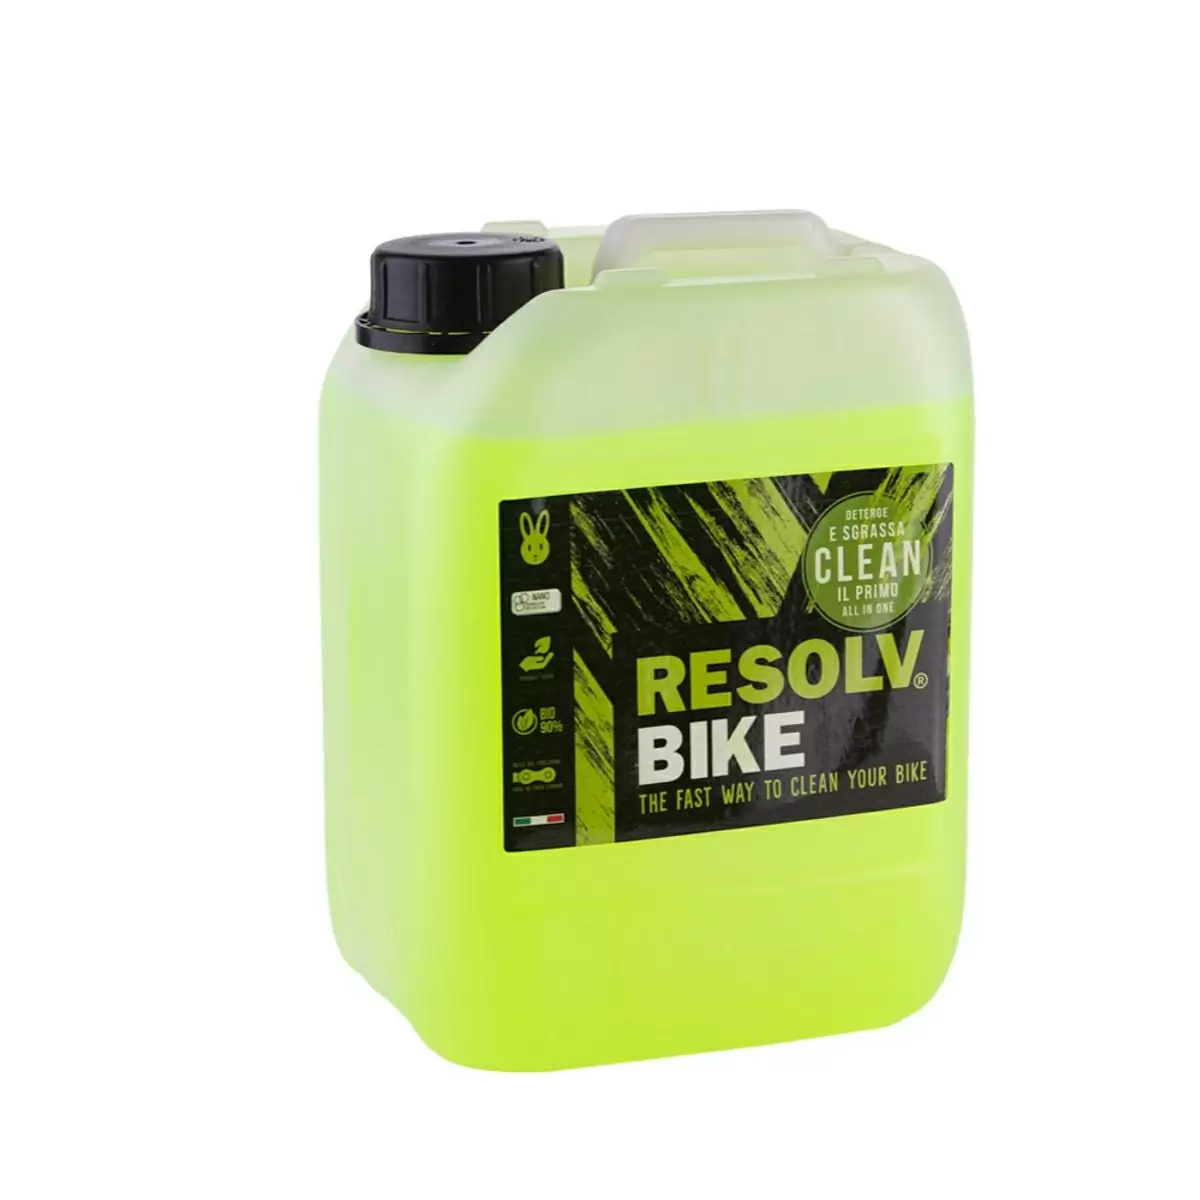 Clean Detergent For Bike Cleaning 5L - image